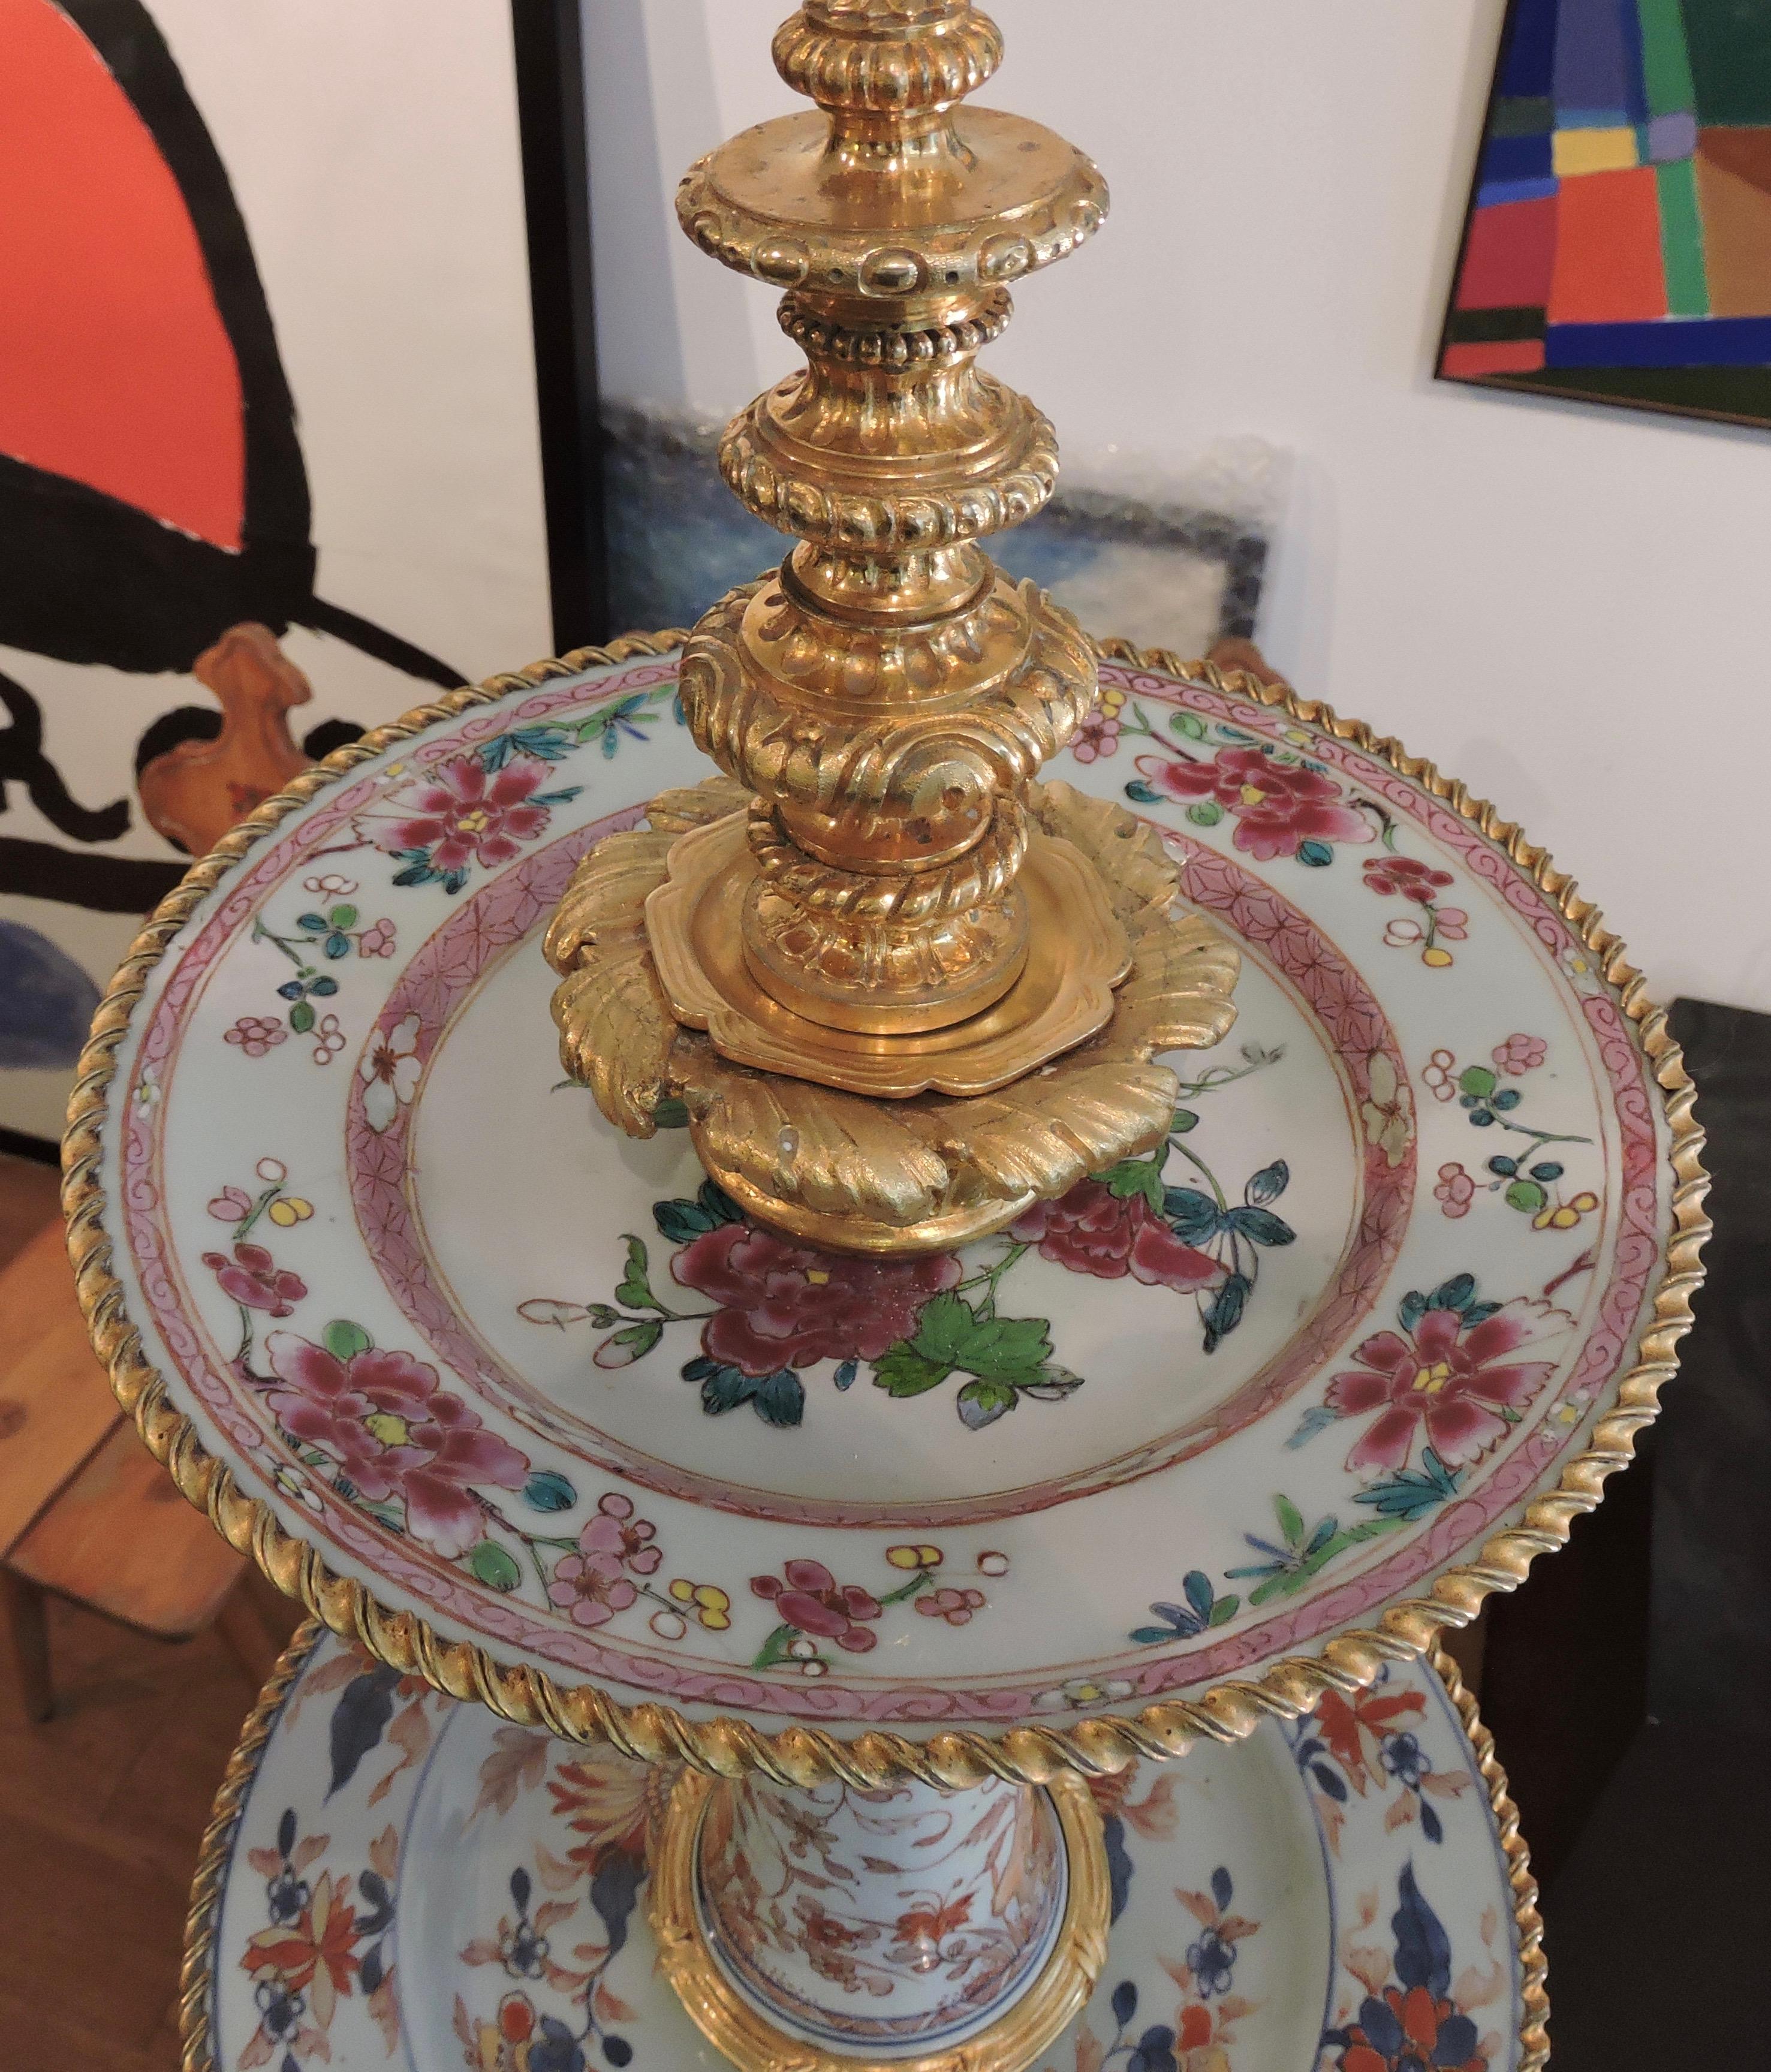 Gilt 19th Century Ormolu-Mounted and 18th Century Chinese Porcelain Centrepiece